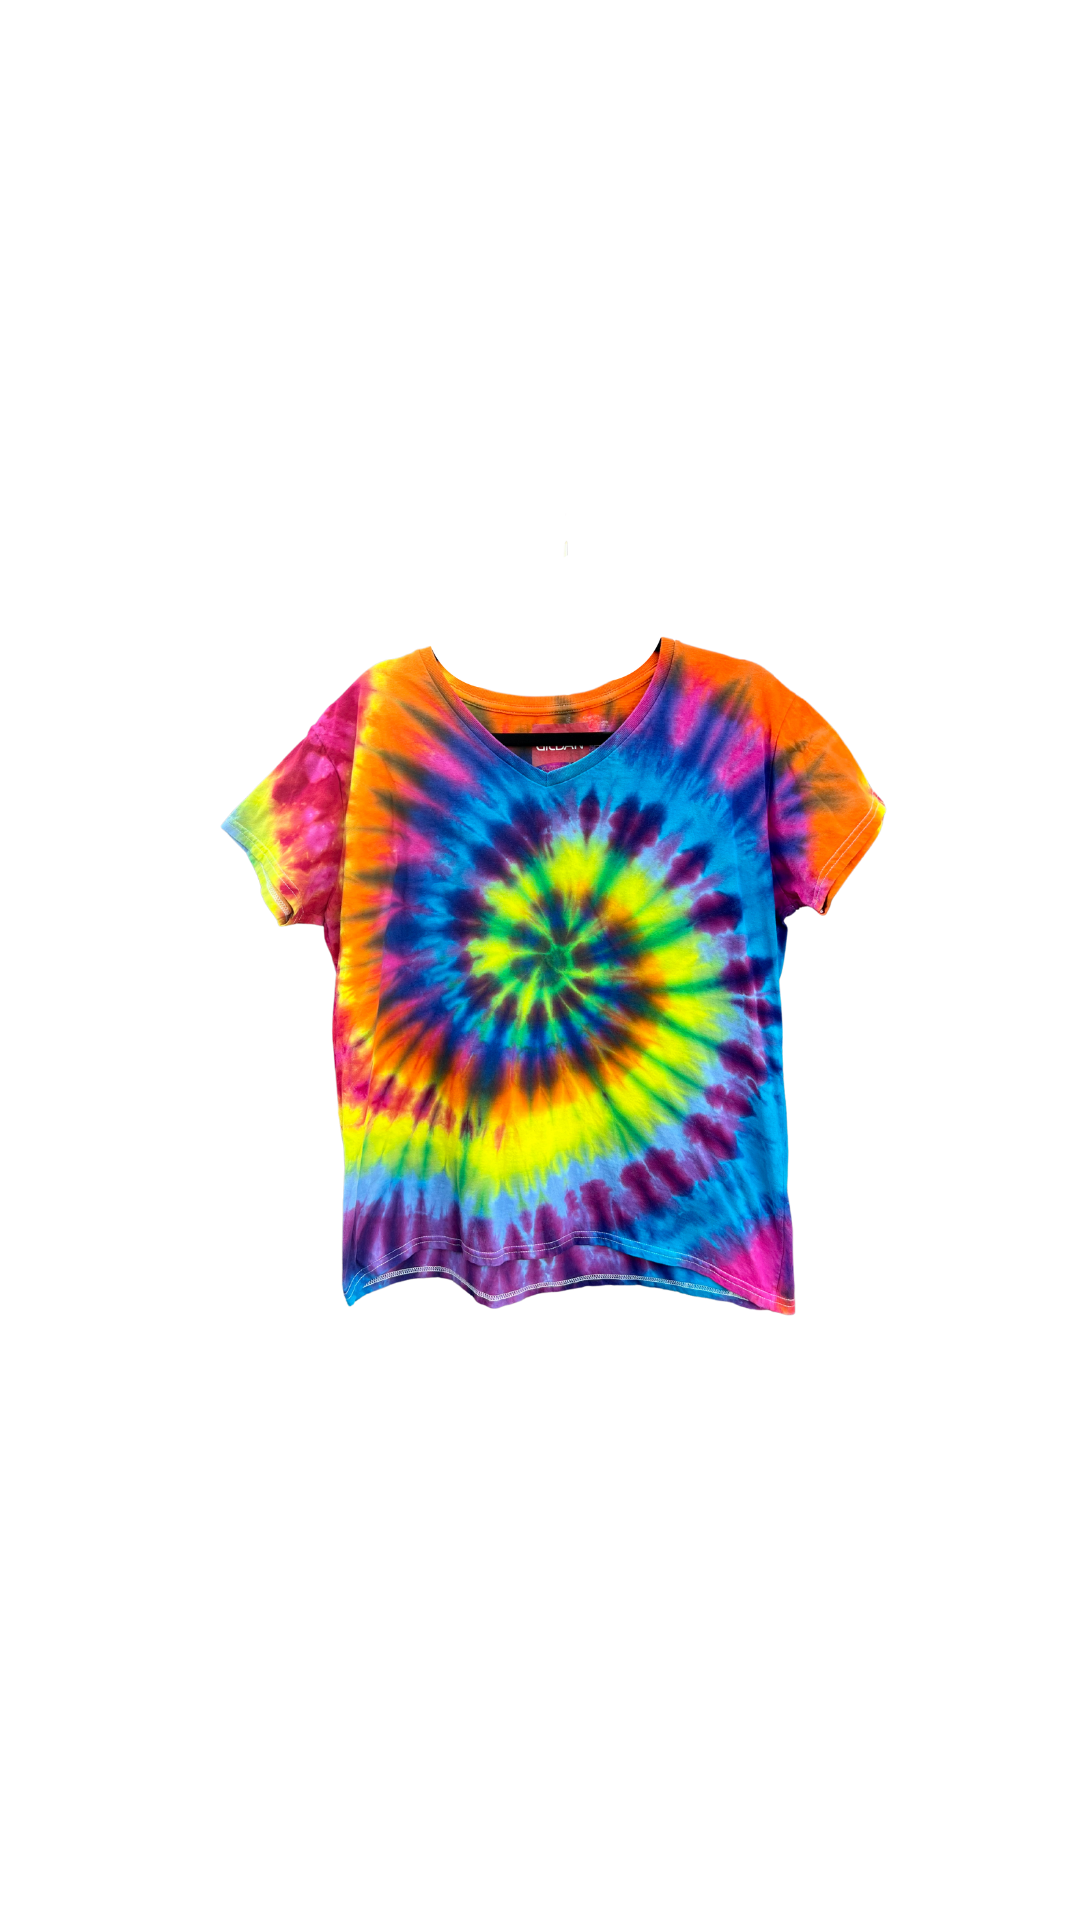 ColorYouGroovy Tie Dye Crop Top Geode (Size XSMALL) - Color You